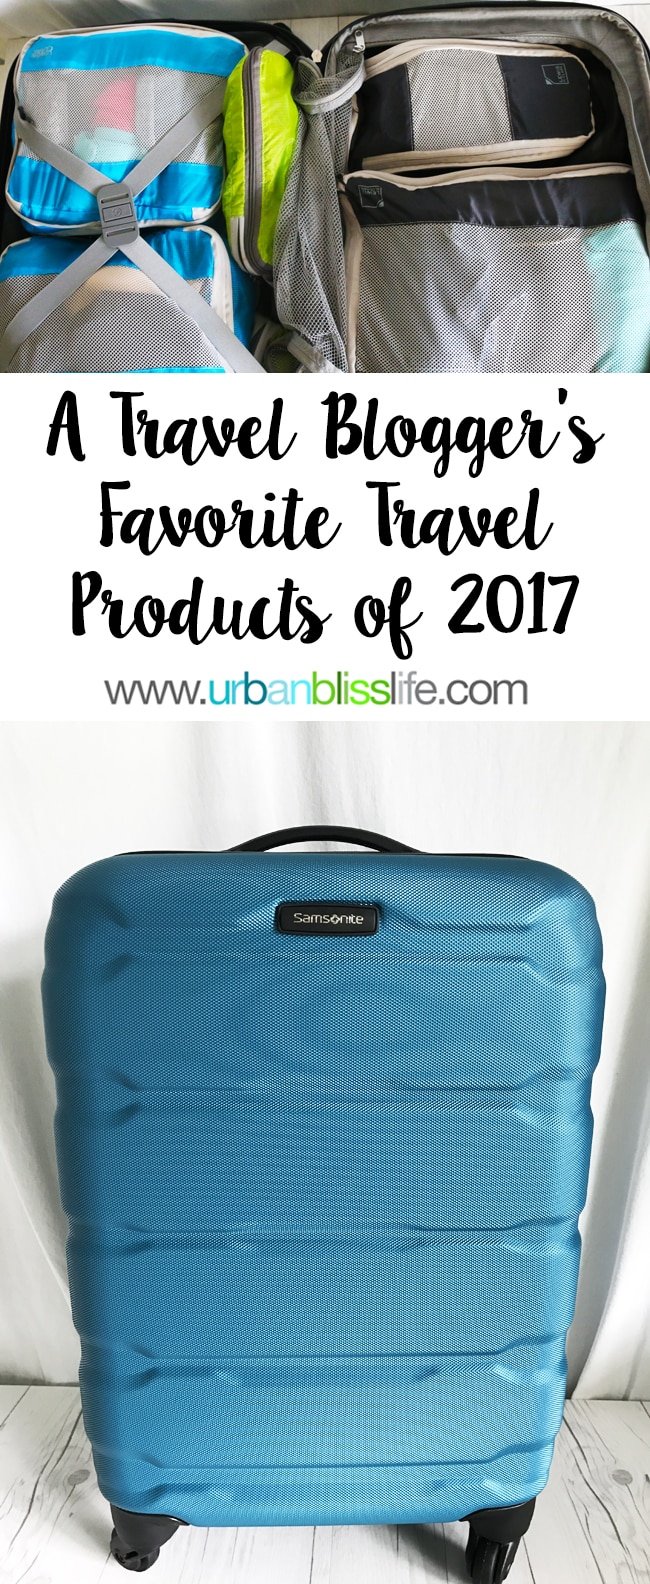 A Travel Blogger's 5 Top Travel Products of 2017 on UrbanBlissLife.com